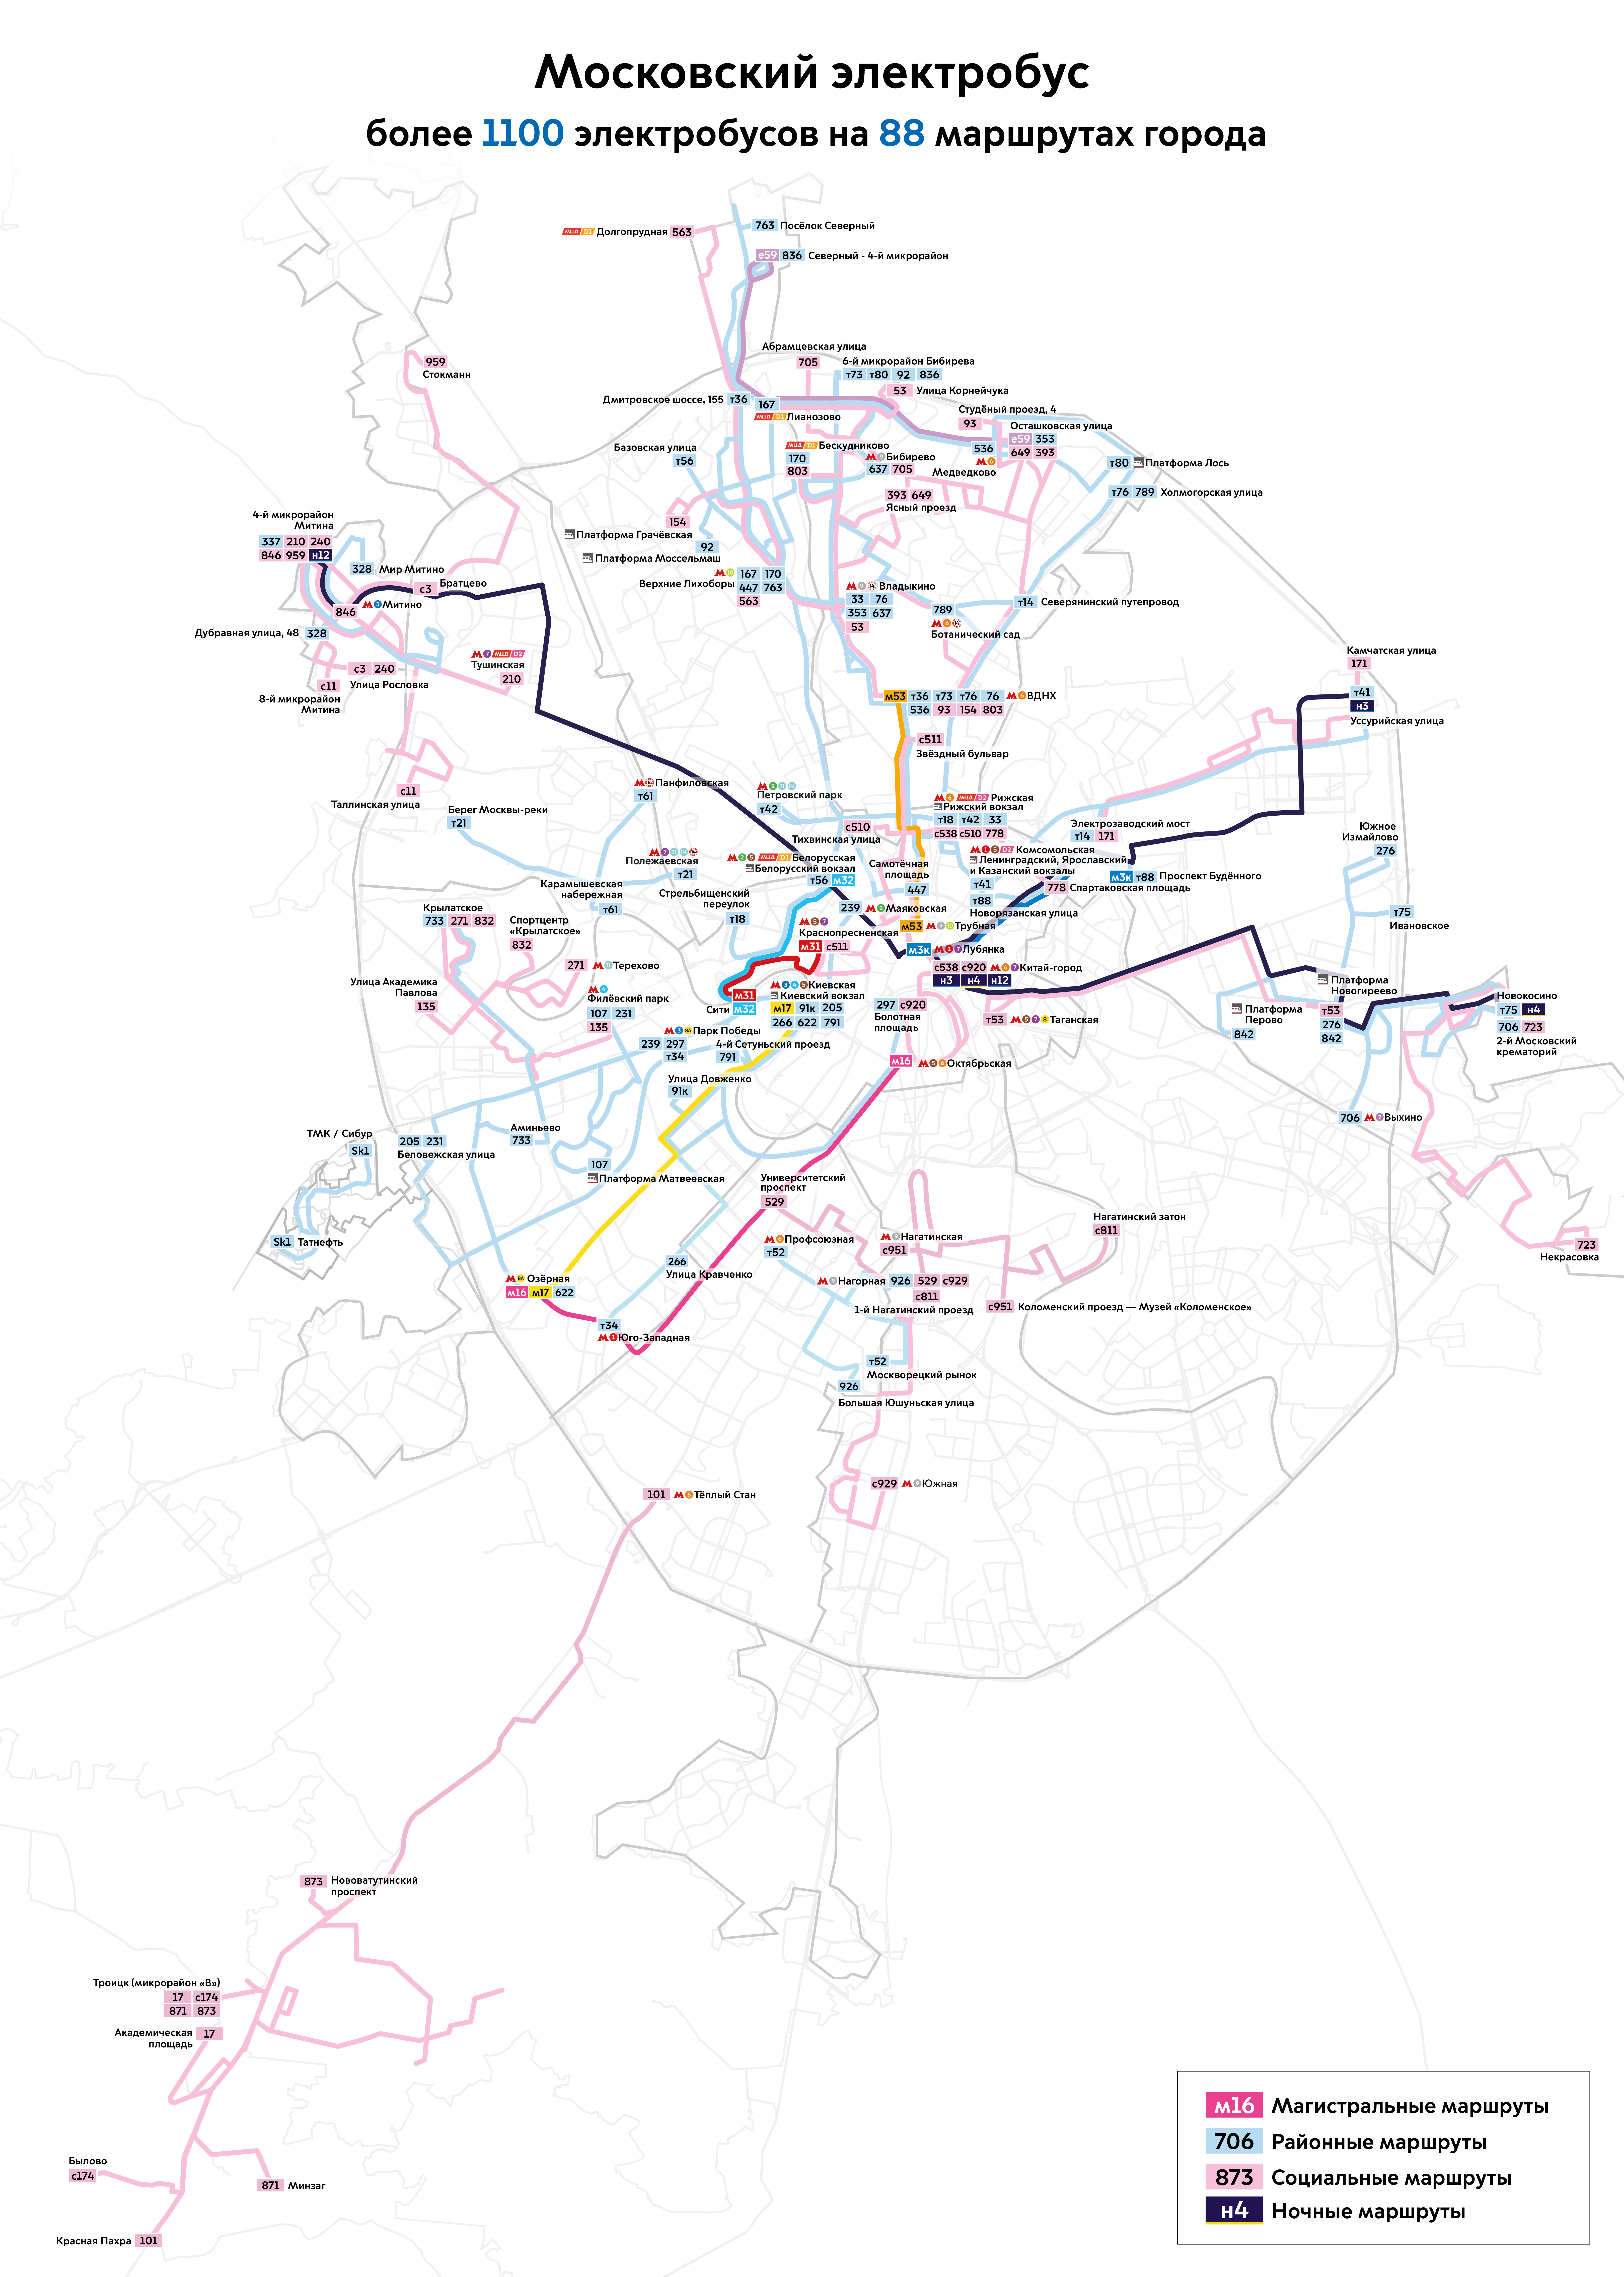 Moskwa — Citywide Maps; Moskwa — Maps of Autonomous Electric Bus Lines